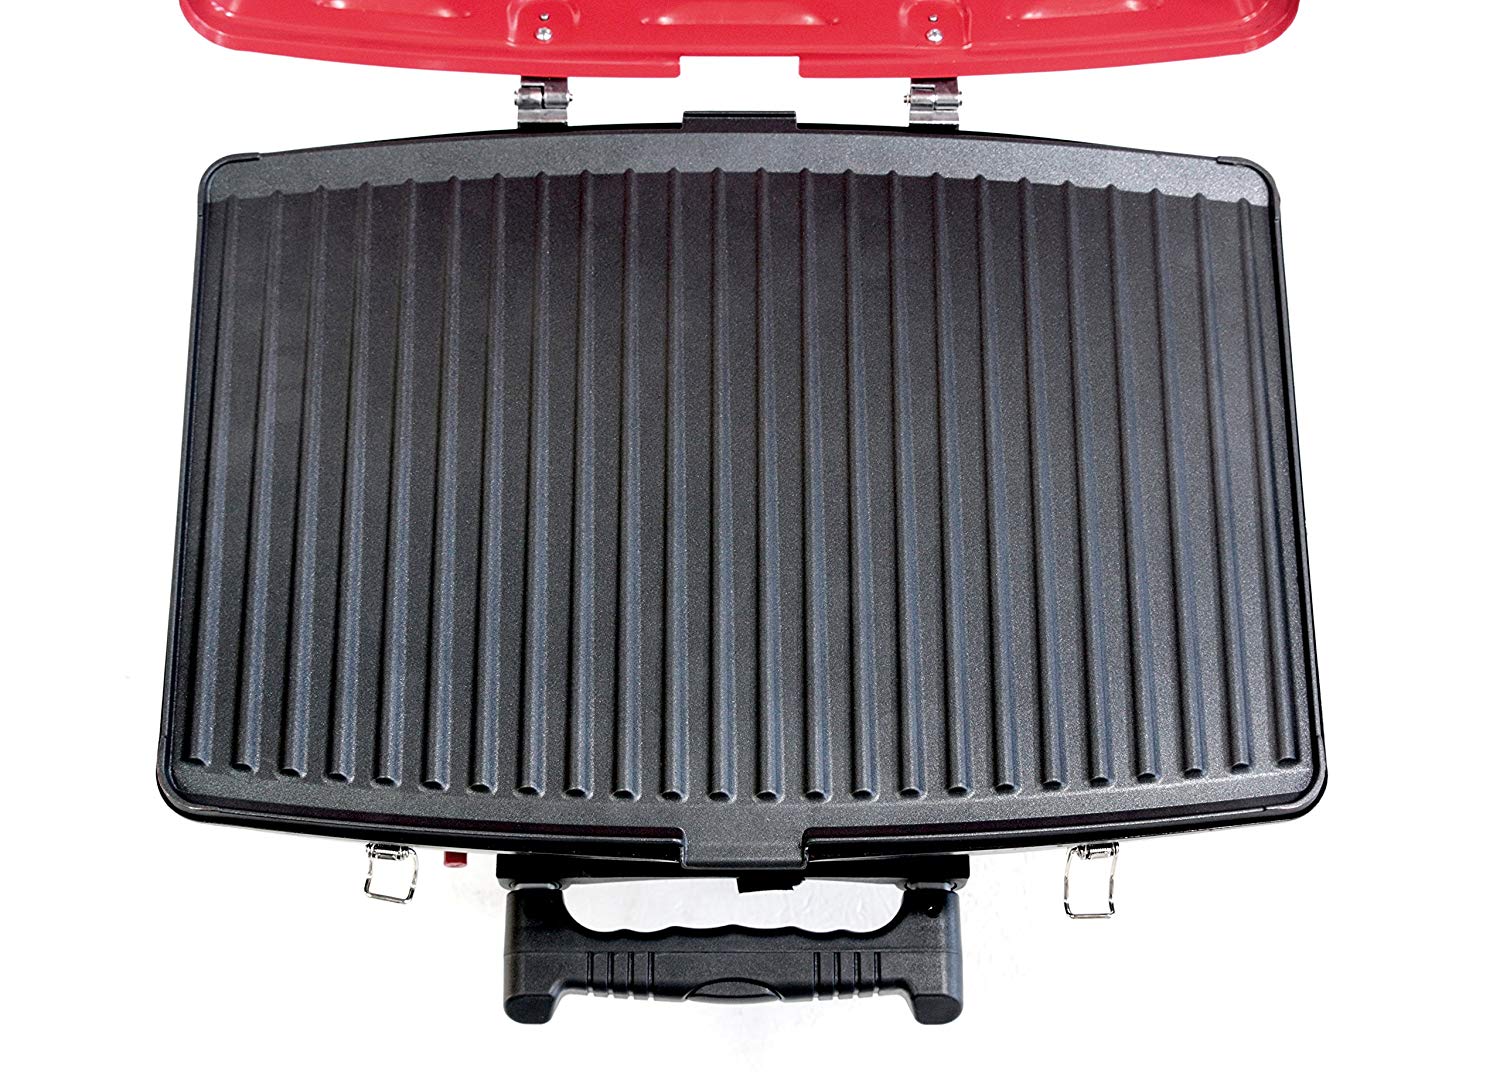 Barbecue Grill Online - Buy Electric, Charcoal and Propane Grills At Best Prices